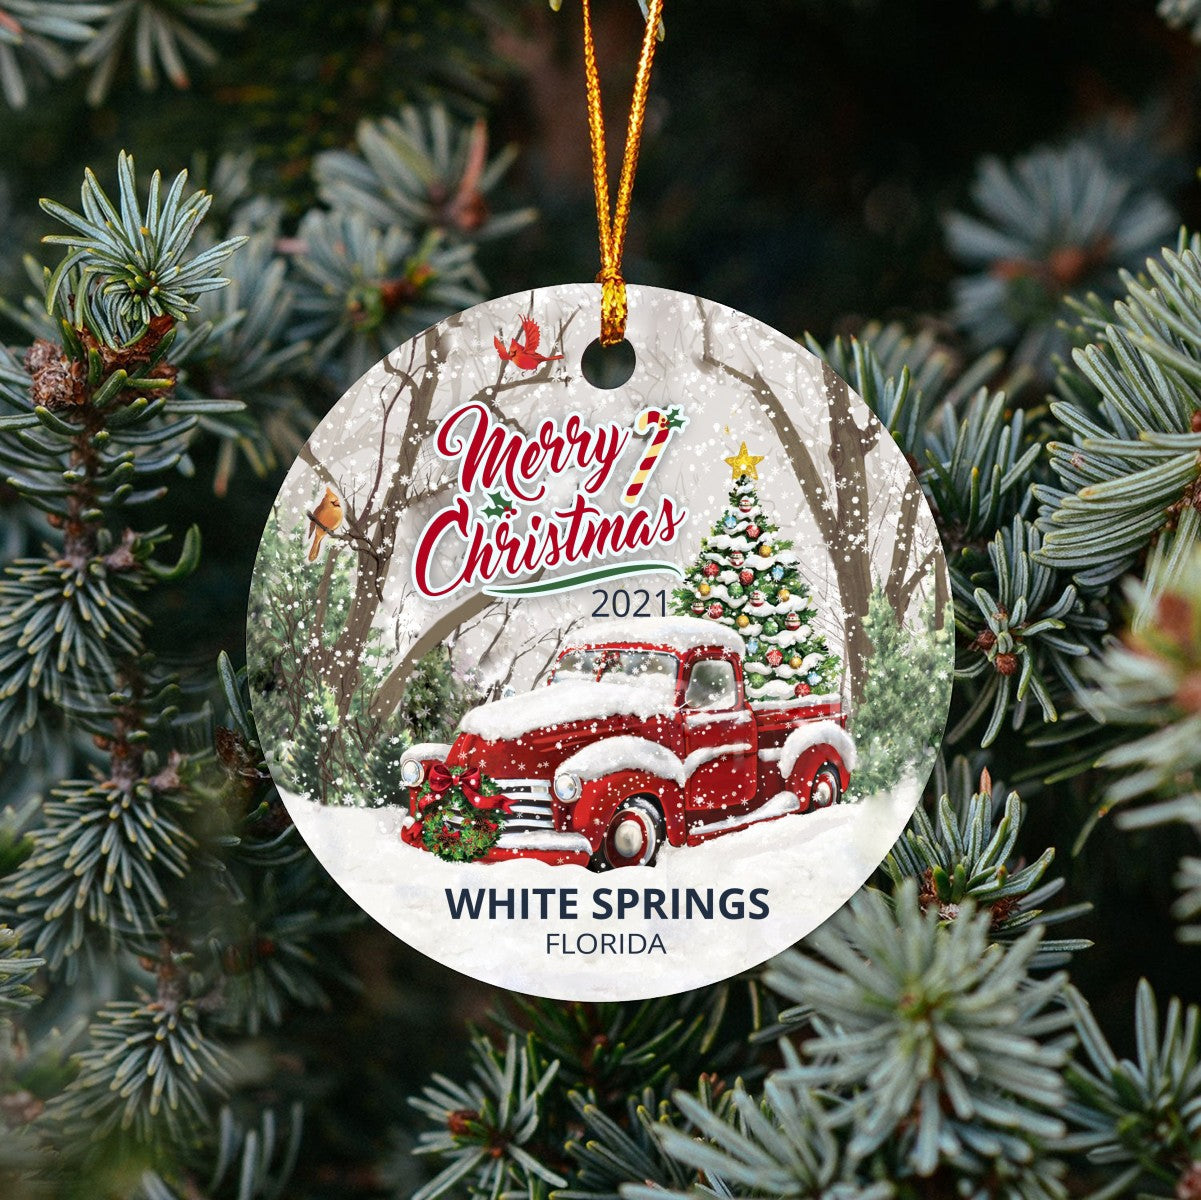 Christmas Tree Ornaments White Springs - Ornament With Name City, State White Springs Florida FL Ornament - Red Truck Xmas Ornaments 3'' Plastic Gift For Family, Friend And Housewarming